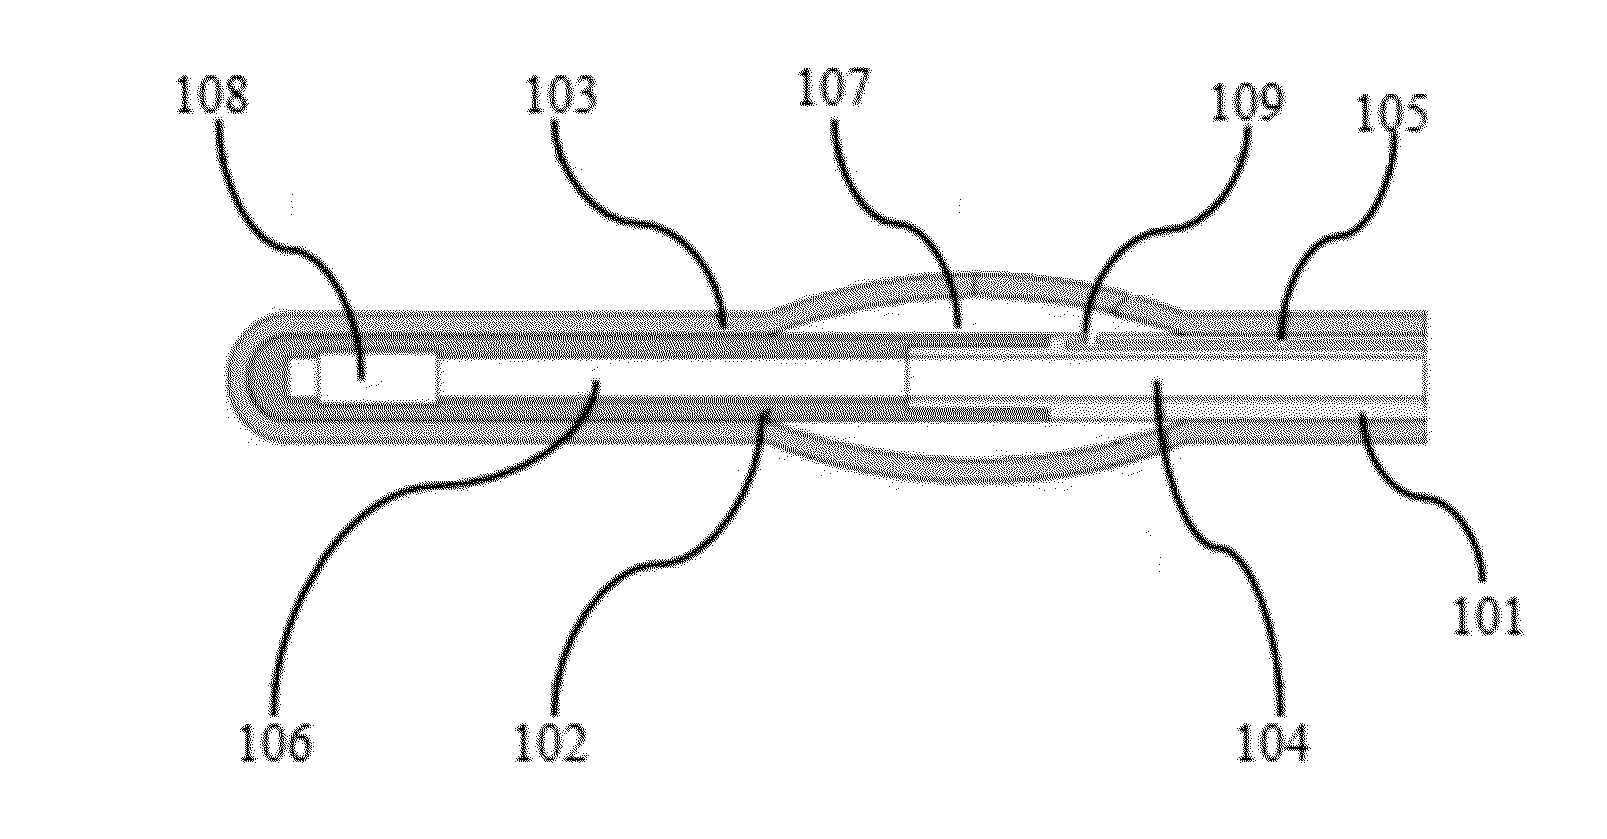 System and method for urinary catheterization